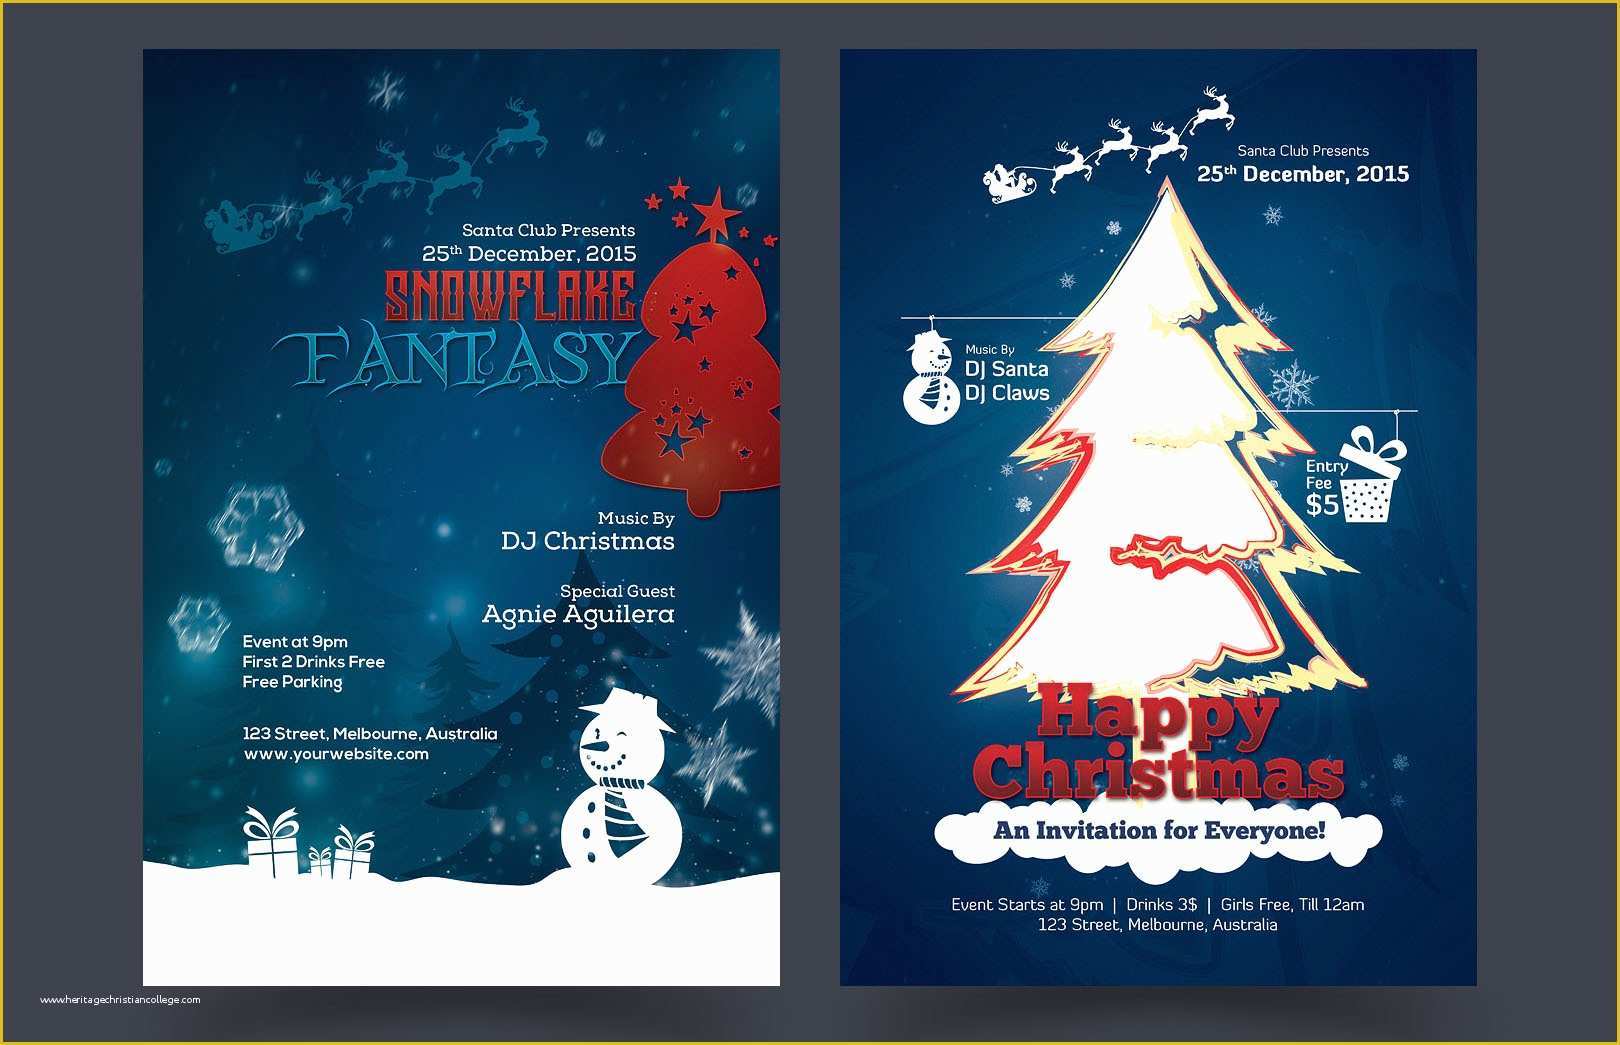 Christmas Flyers Templates Free Psd Of 70 Premium & Free Flyer Templates In Psd Download and